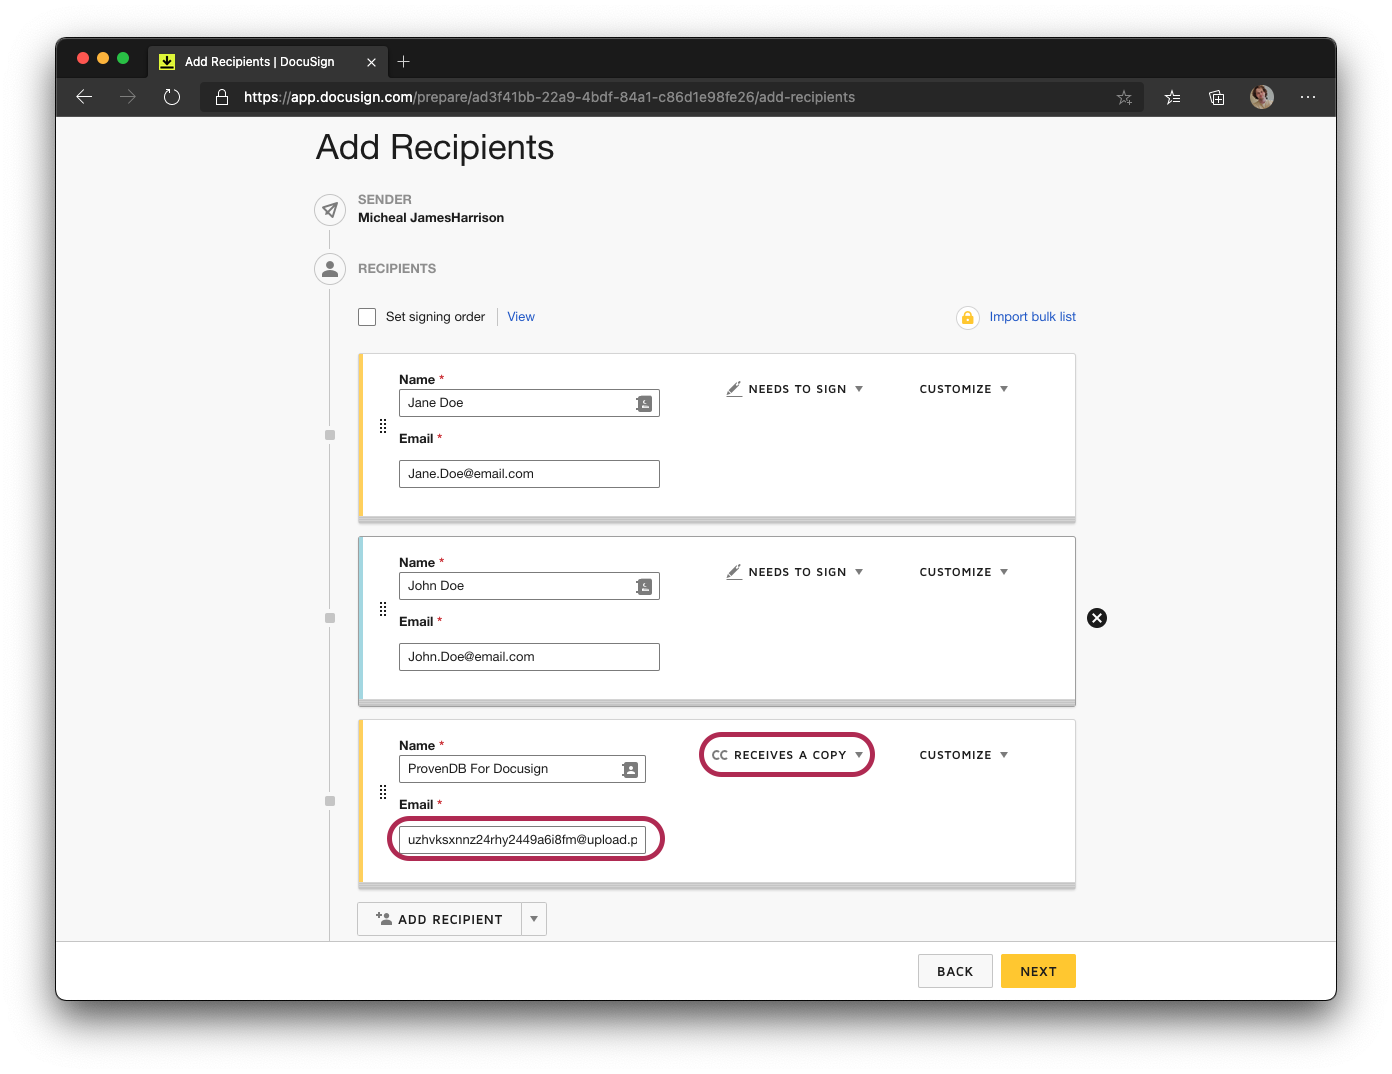 Added ProvenDB for DocuSign as a recipient of your envelope.